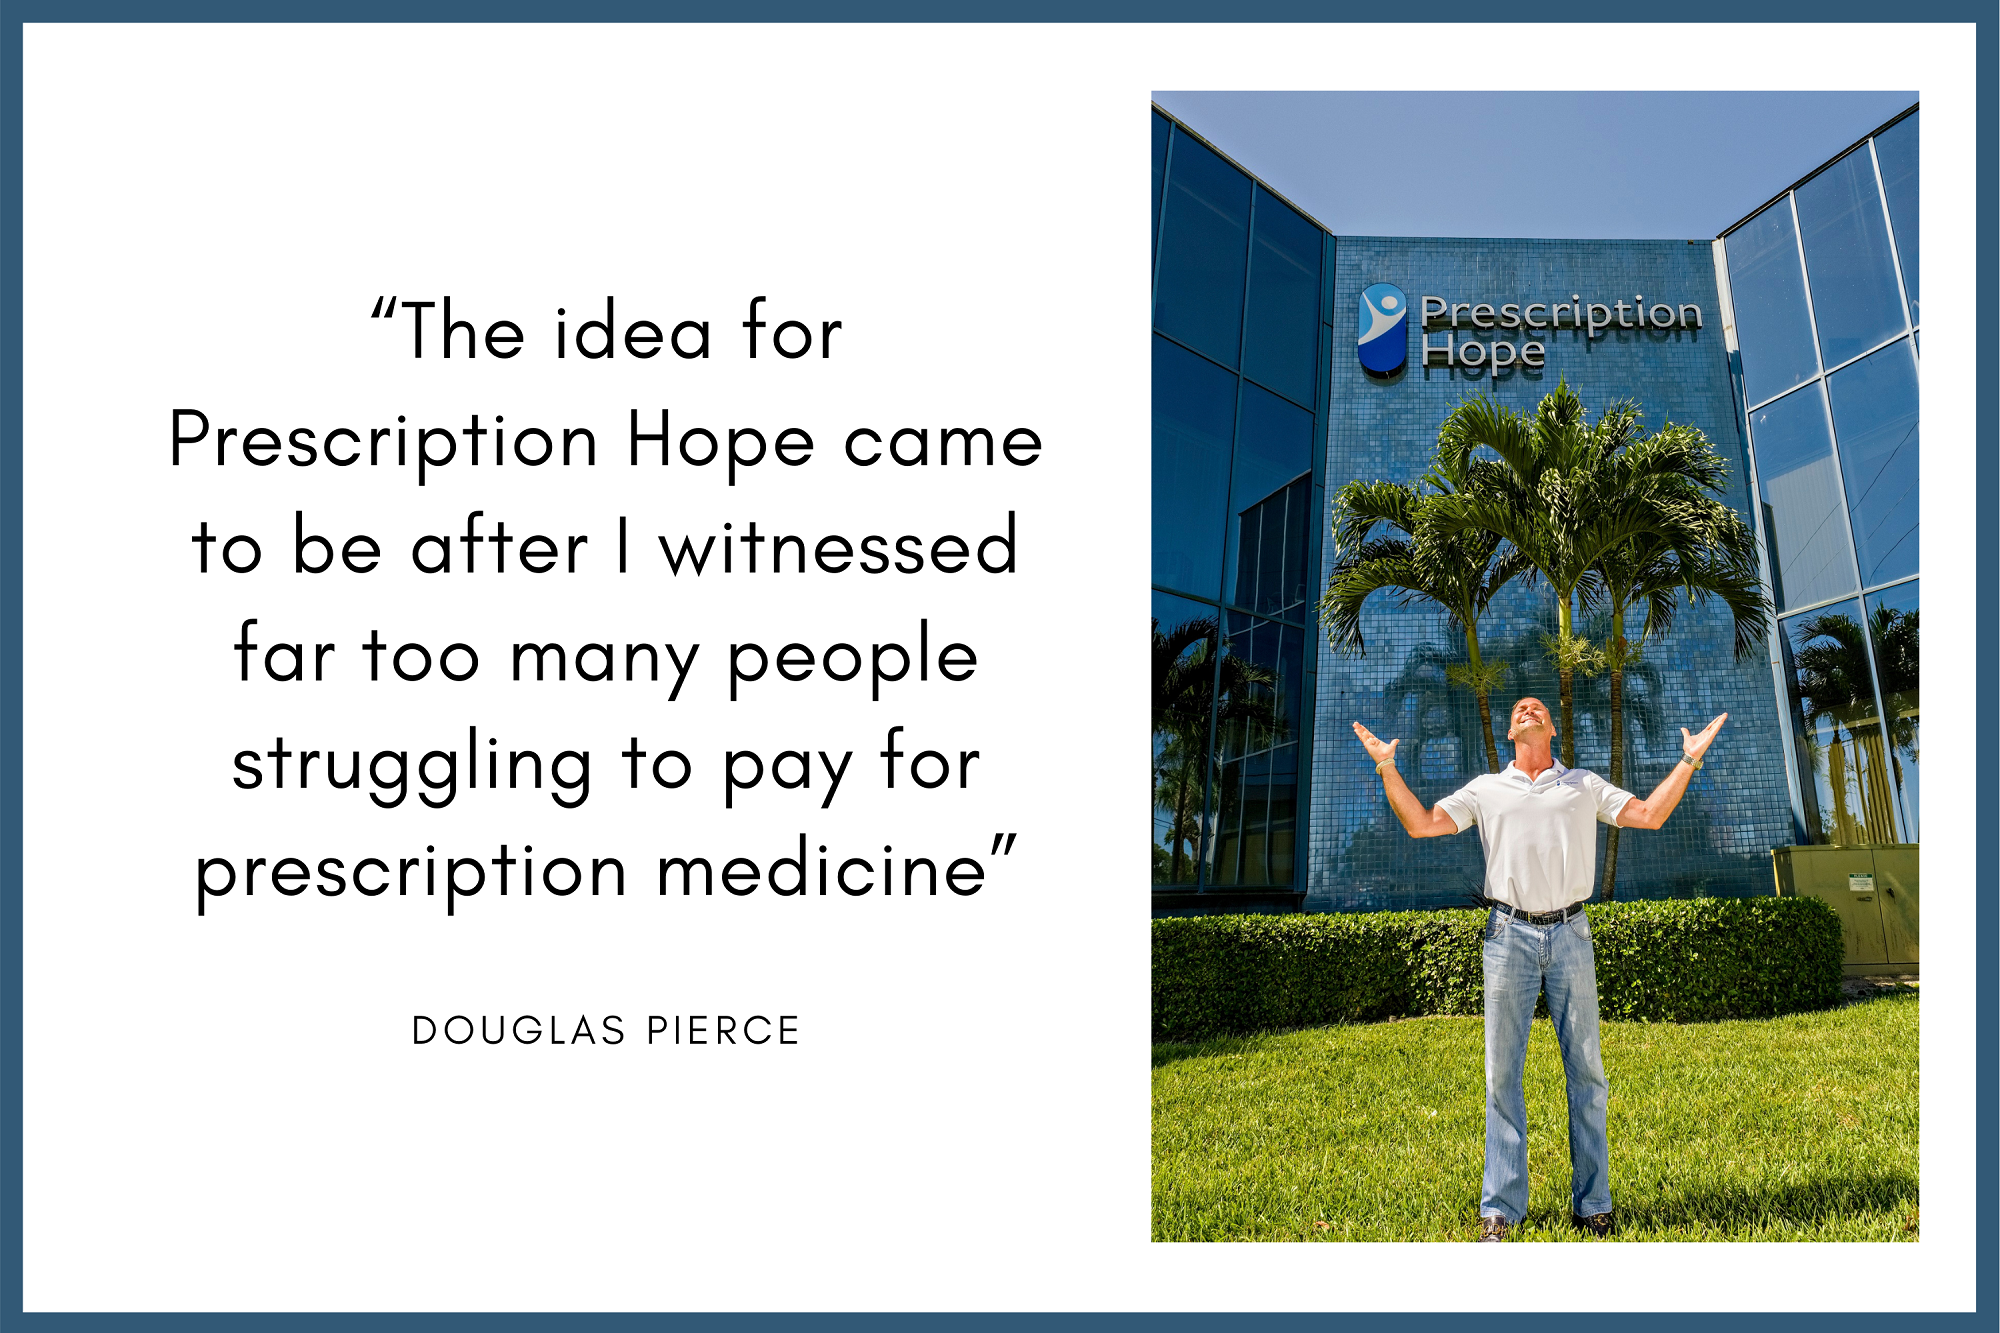 Prescription Hope, Friday, January 8, 2021, Press release picture